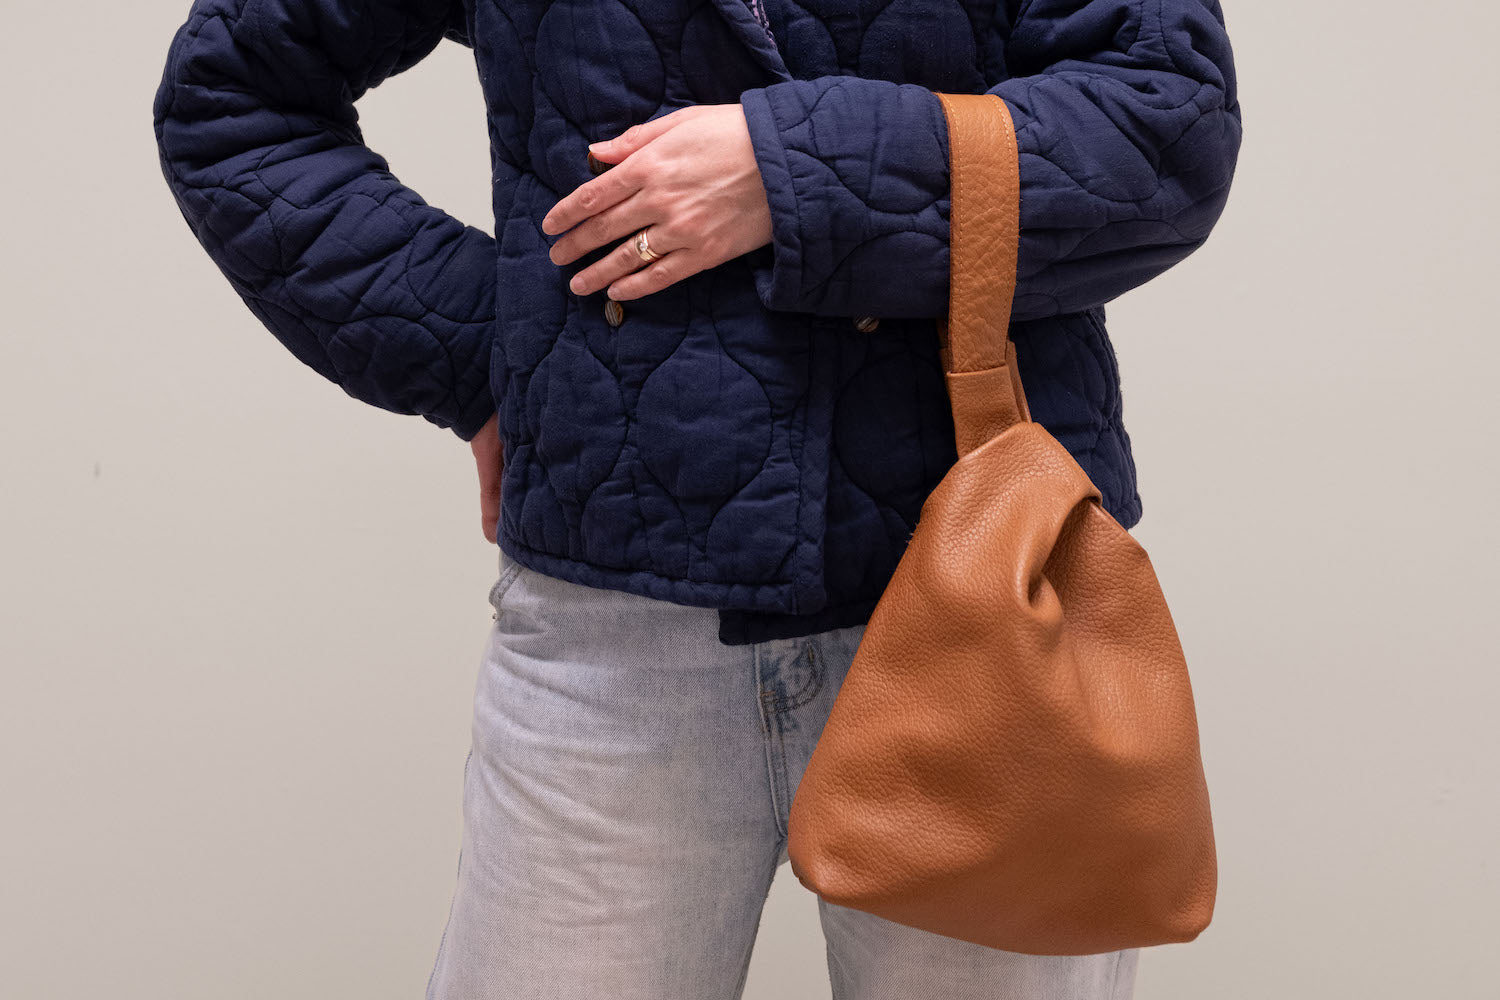 The Masterful Flair of Japanese Bag Culture